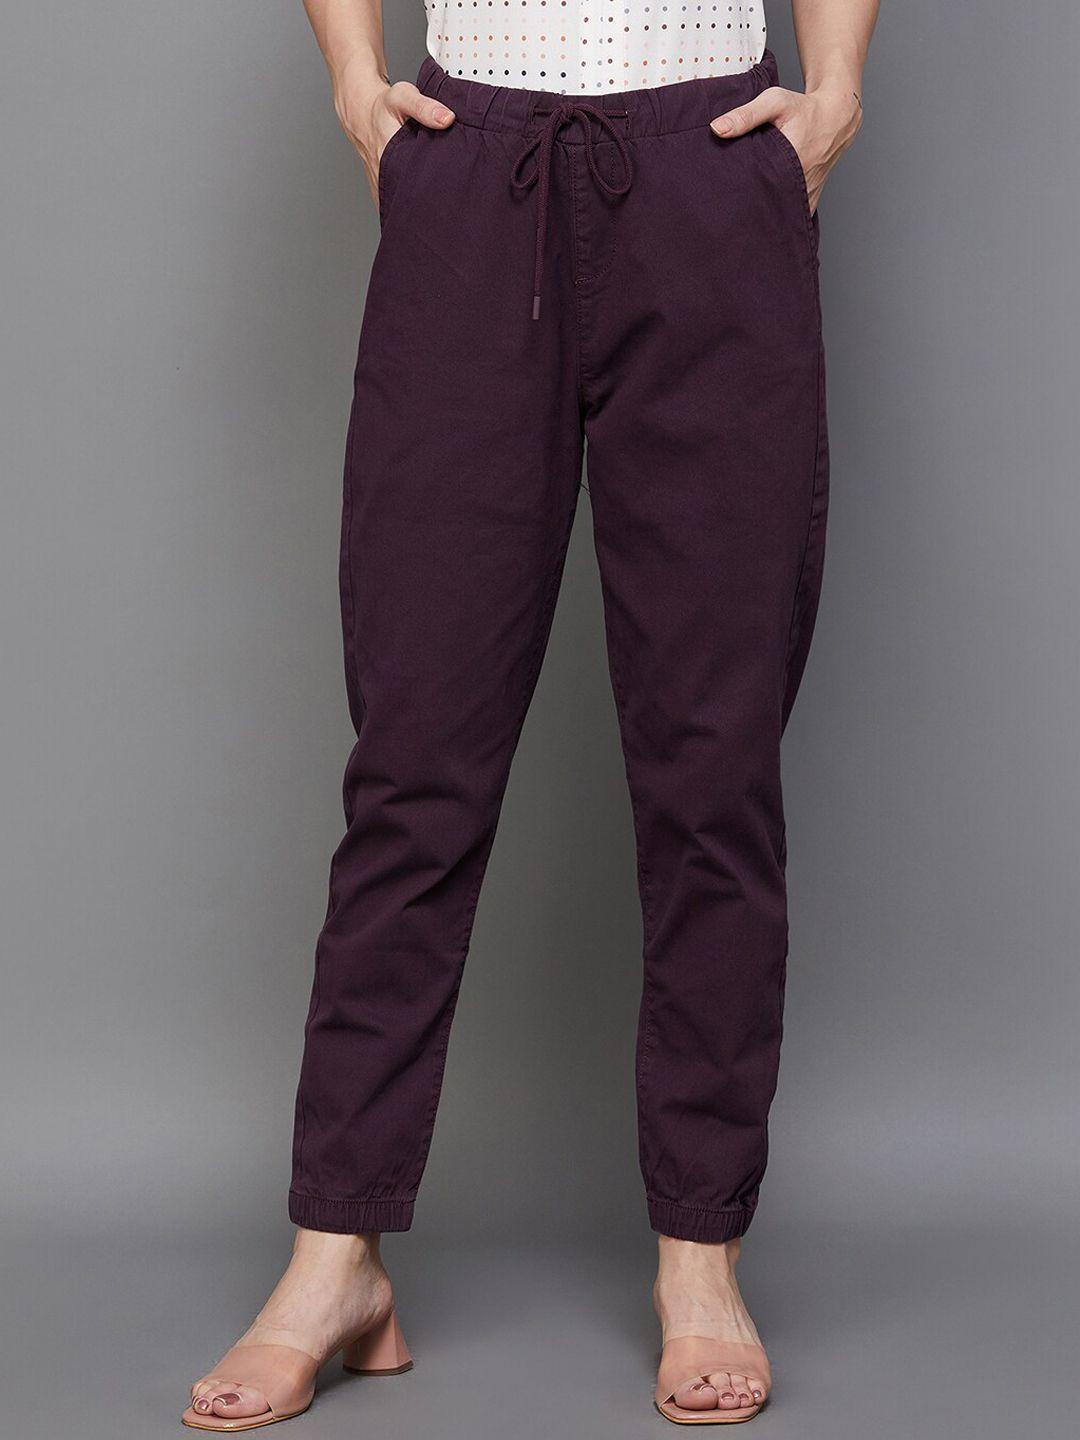 code by lifestyle women mid rise joggers